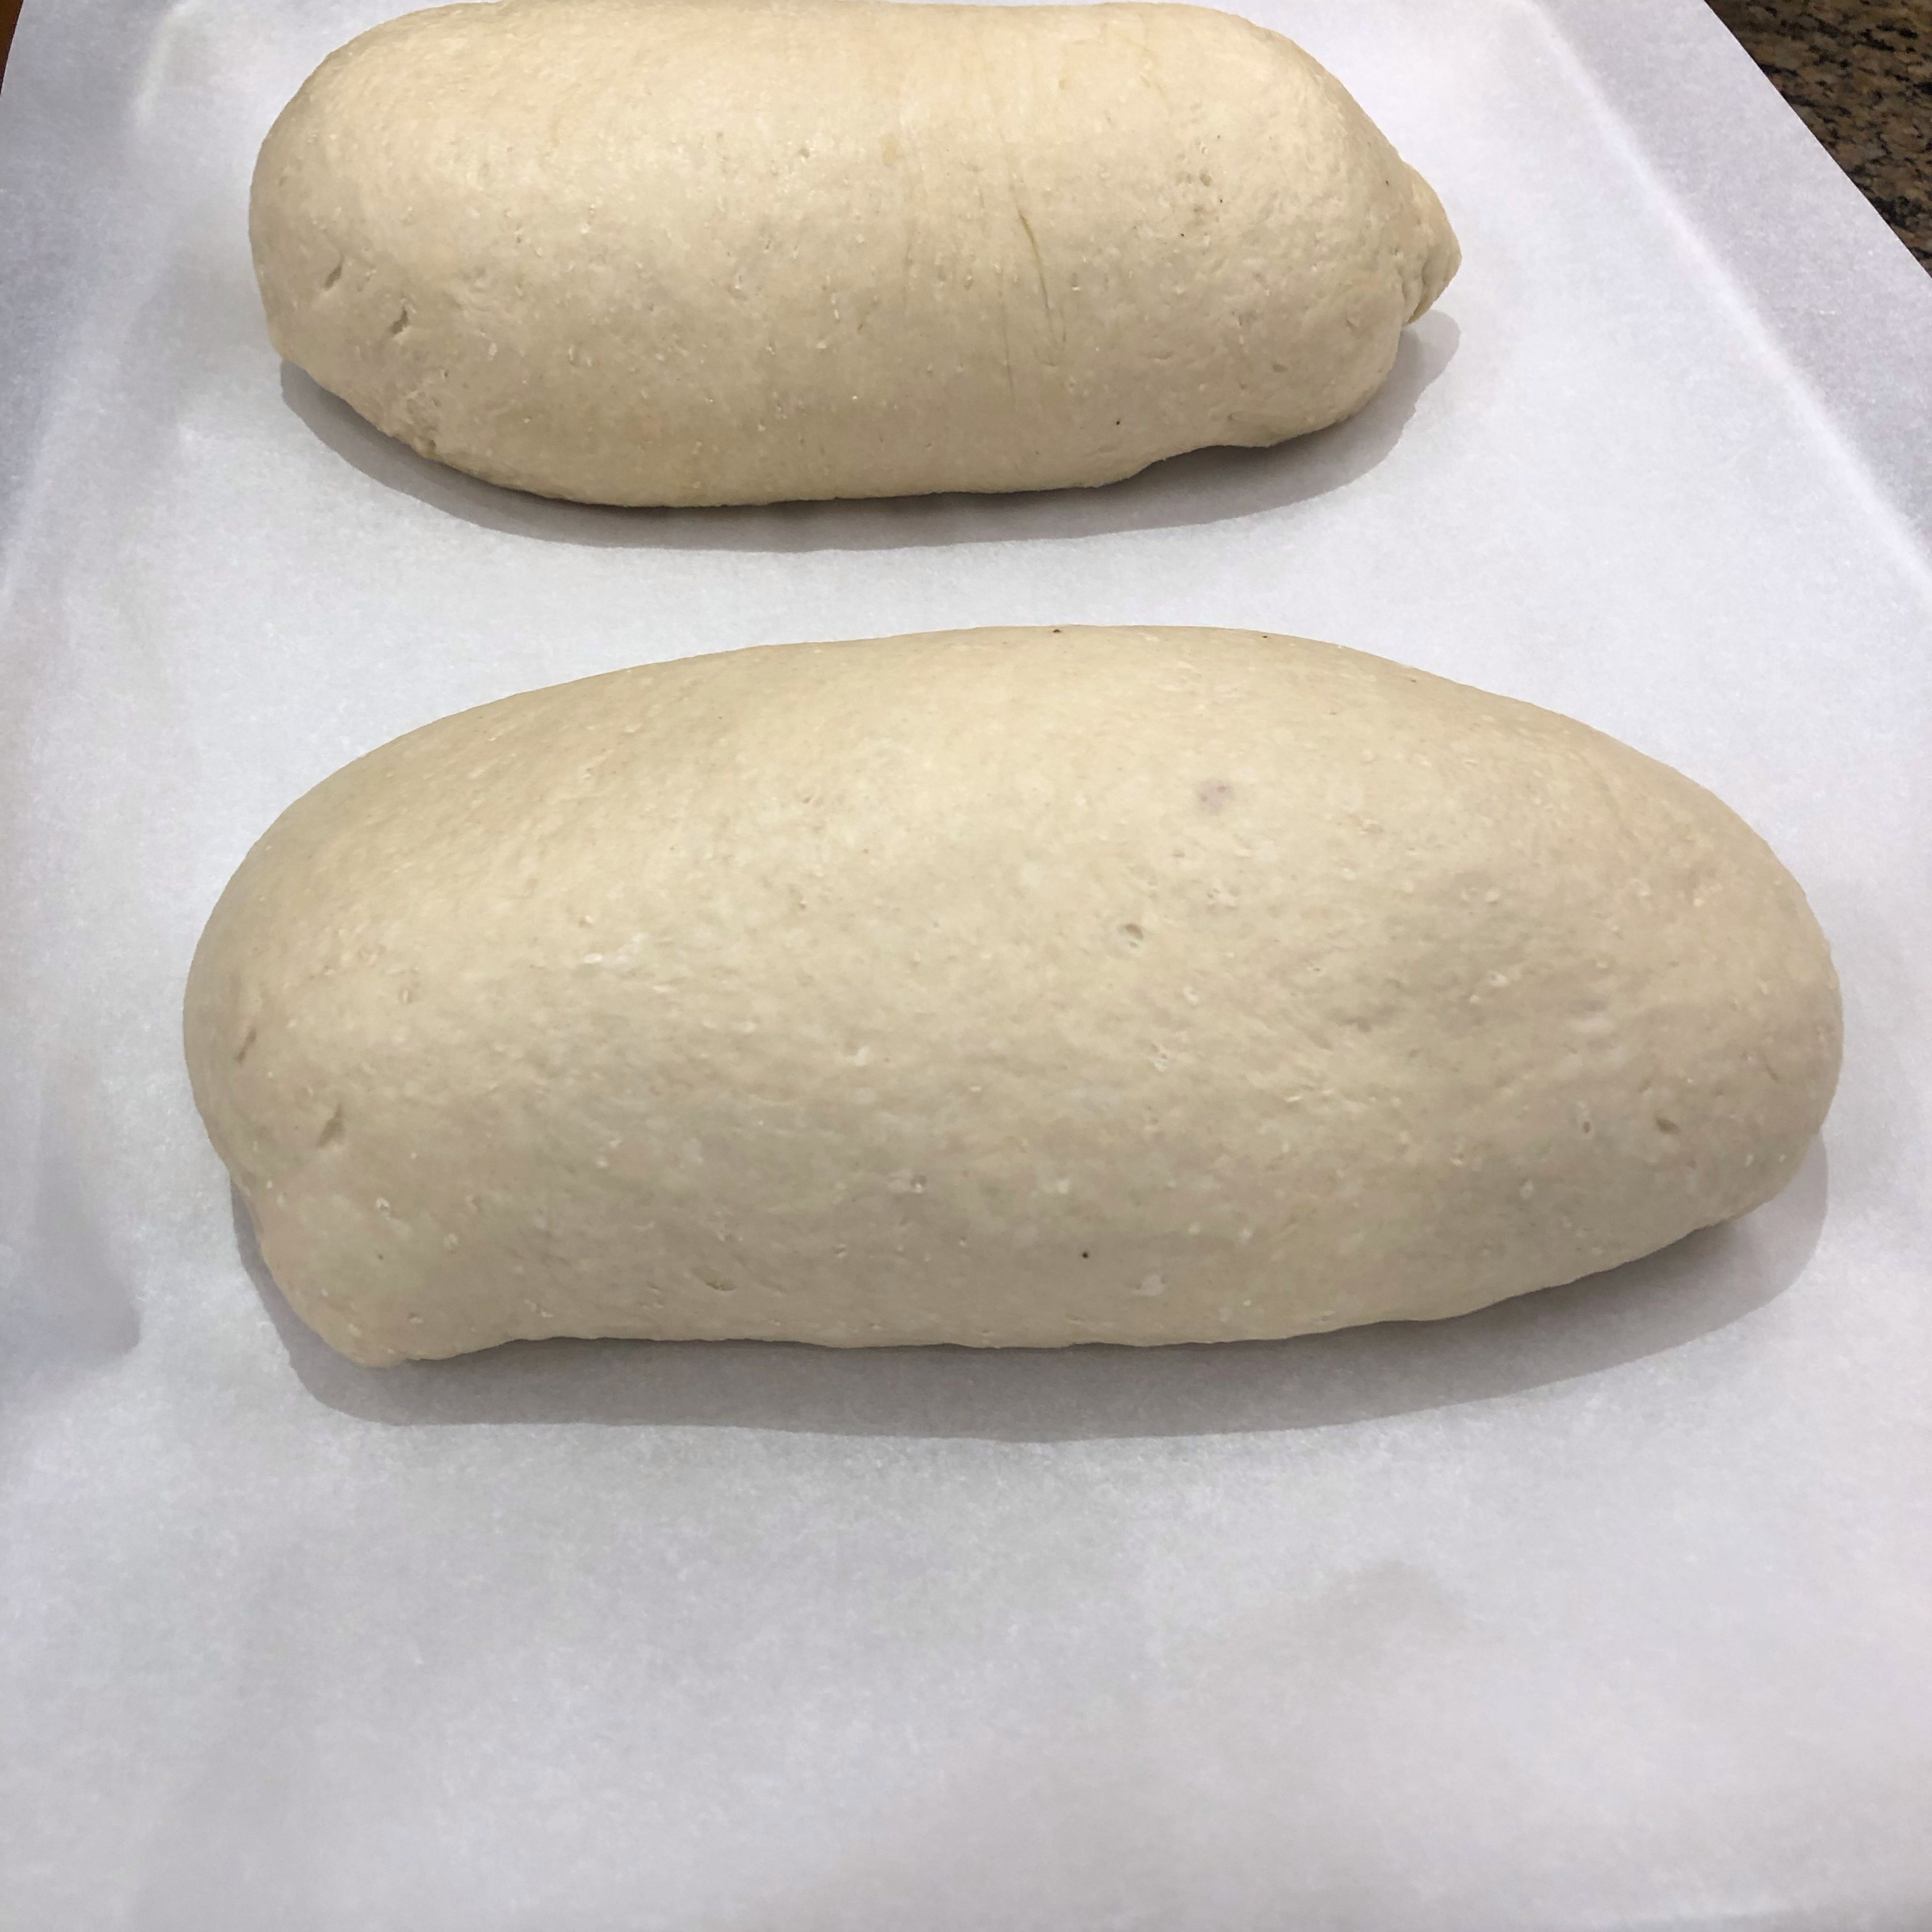 Line a large baking tray with parchment paper. Place loaves, seam side down, on the tray, leaving enough space between them for expansion as they rise. Cover with kitchen towel and set tray in a warm spot and allow bread to rise for 30 - 40 minutes.